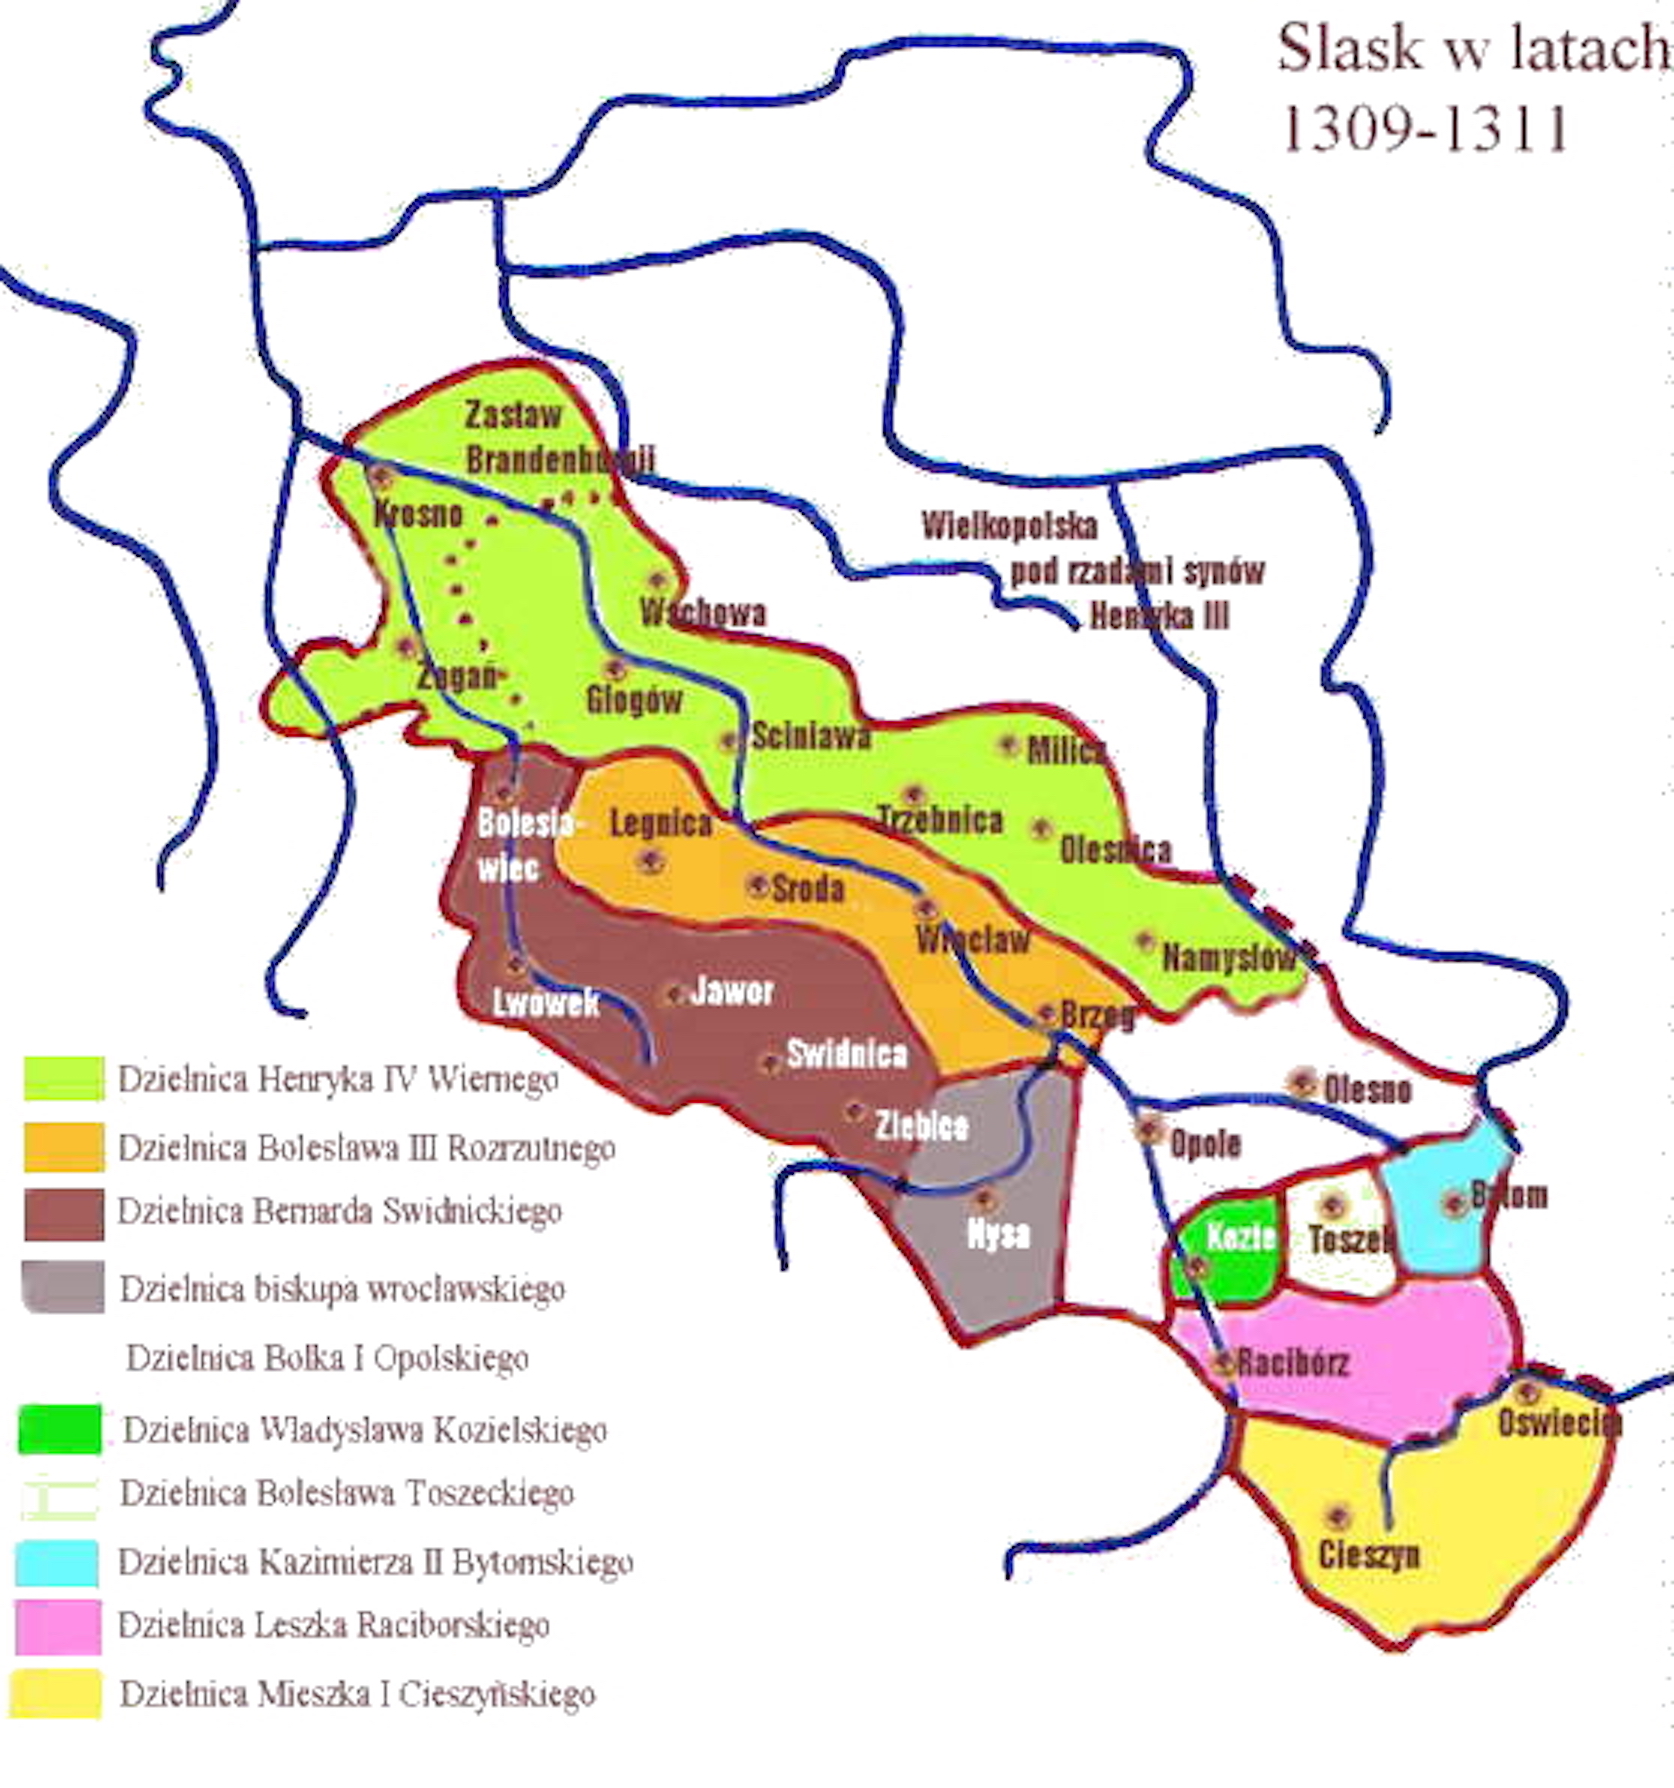 The Silesian duchies, 1309-1311. Source: Wikipedia Commons 